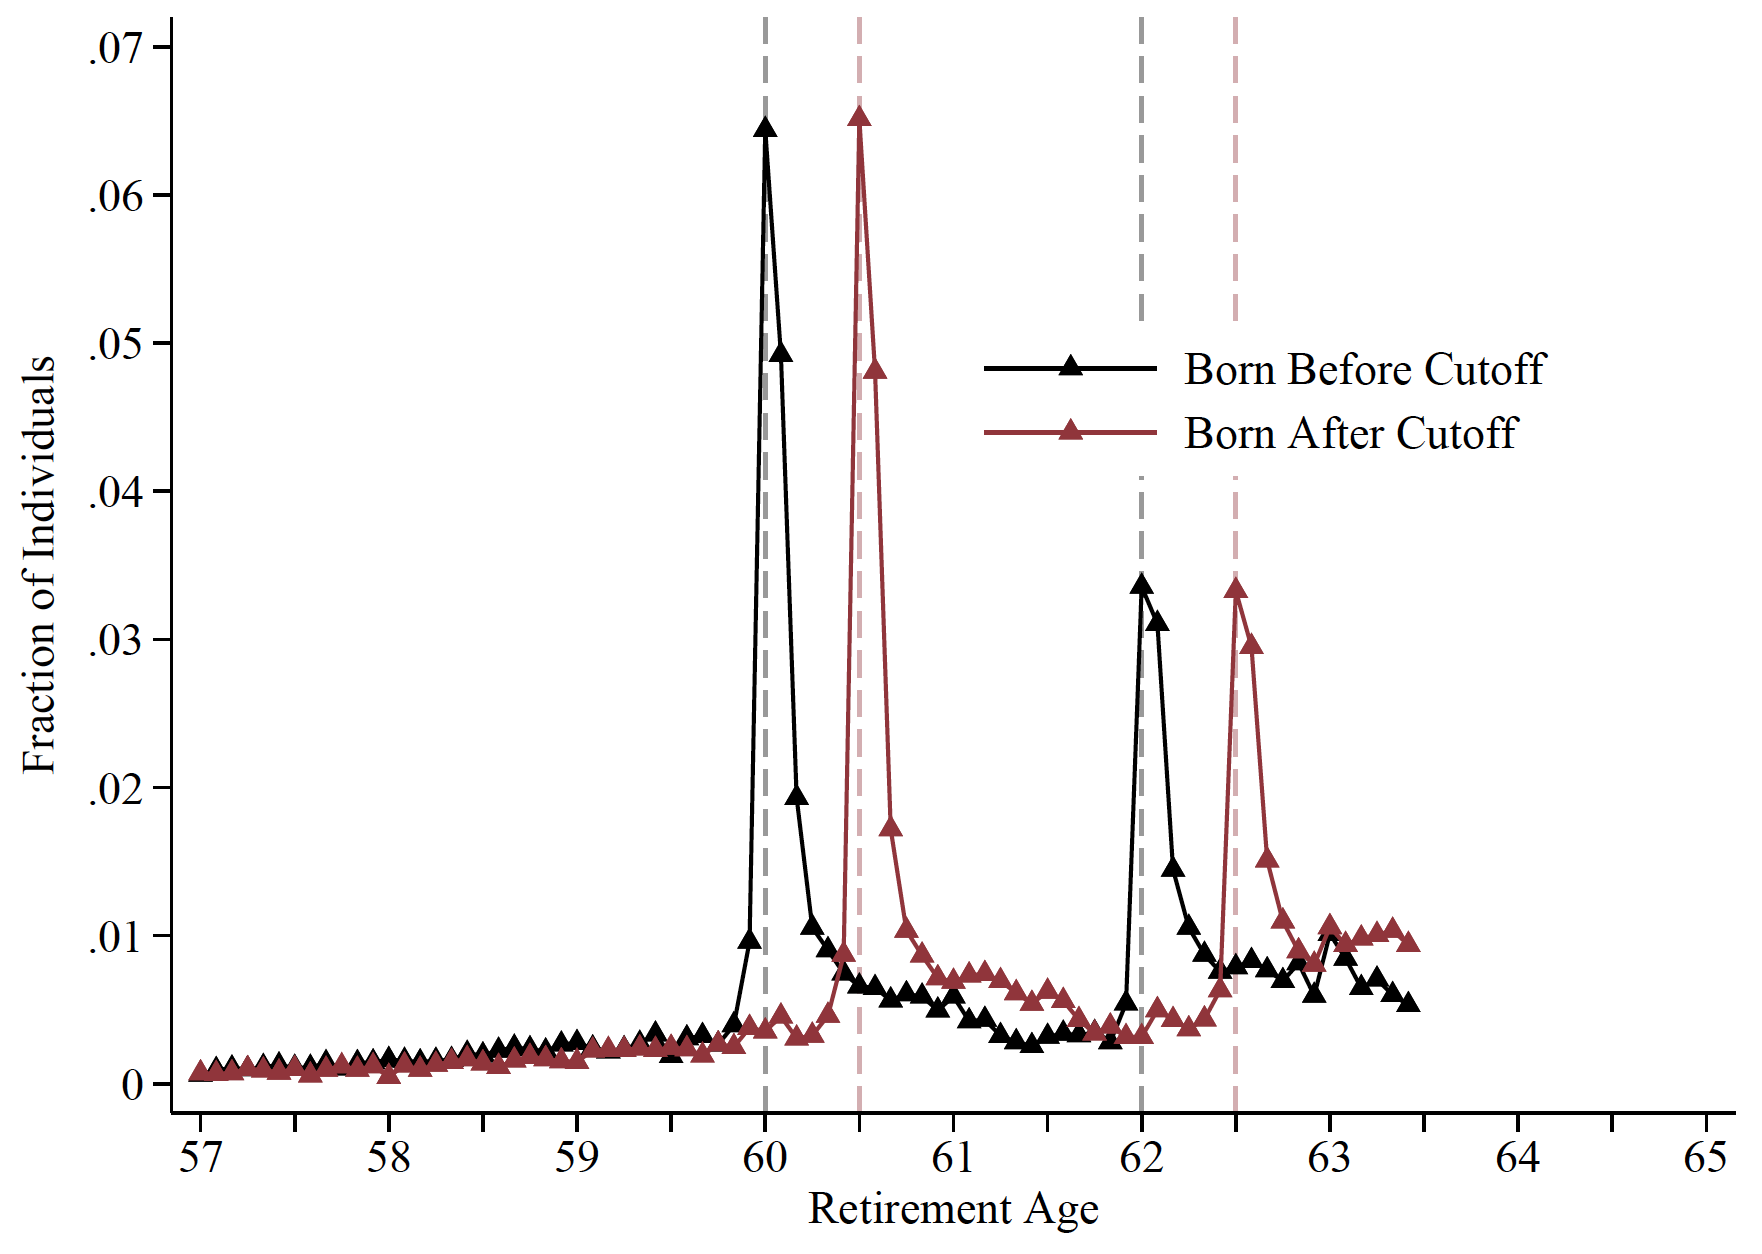 Figure 1 Distributions of retirement ages, for people affected and unaffected by the reform